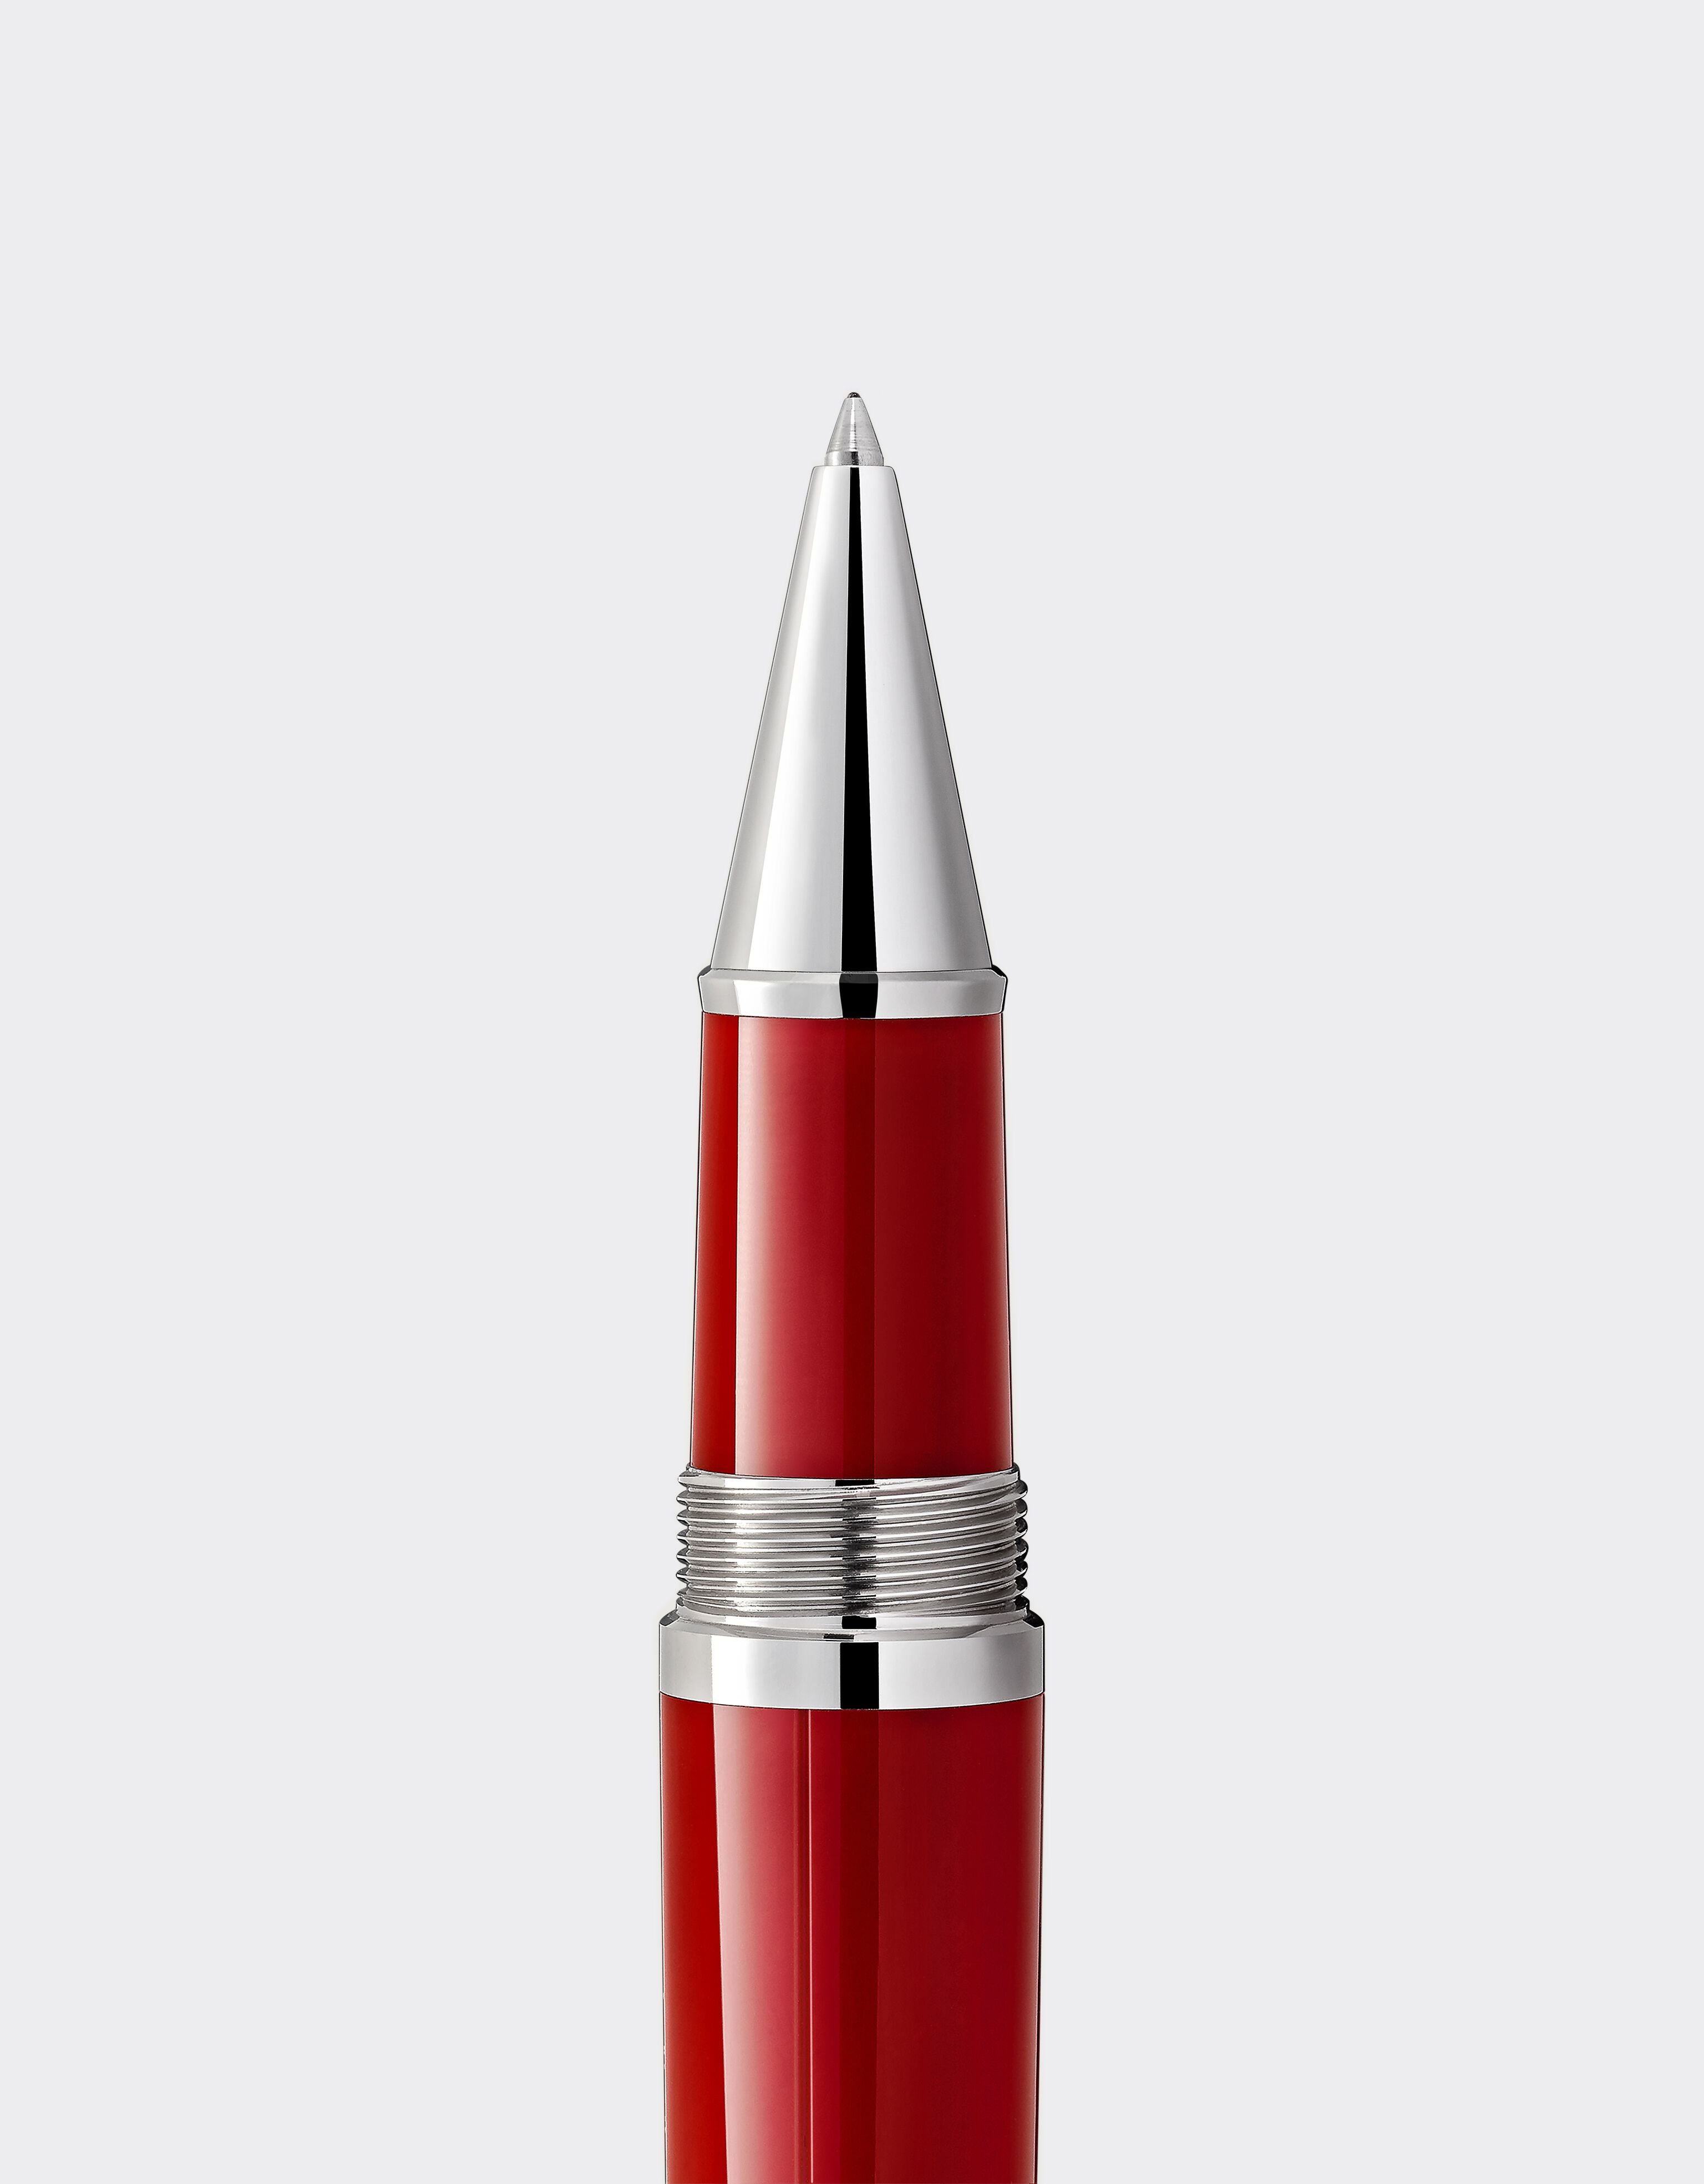 Ferrari Montblanc Great Characters Enzo Ferrari Special Edition rollerball pen Red F0431f